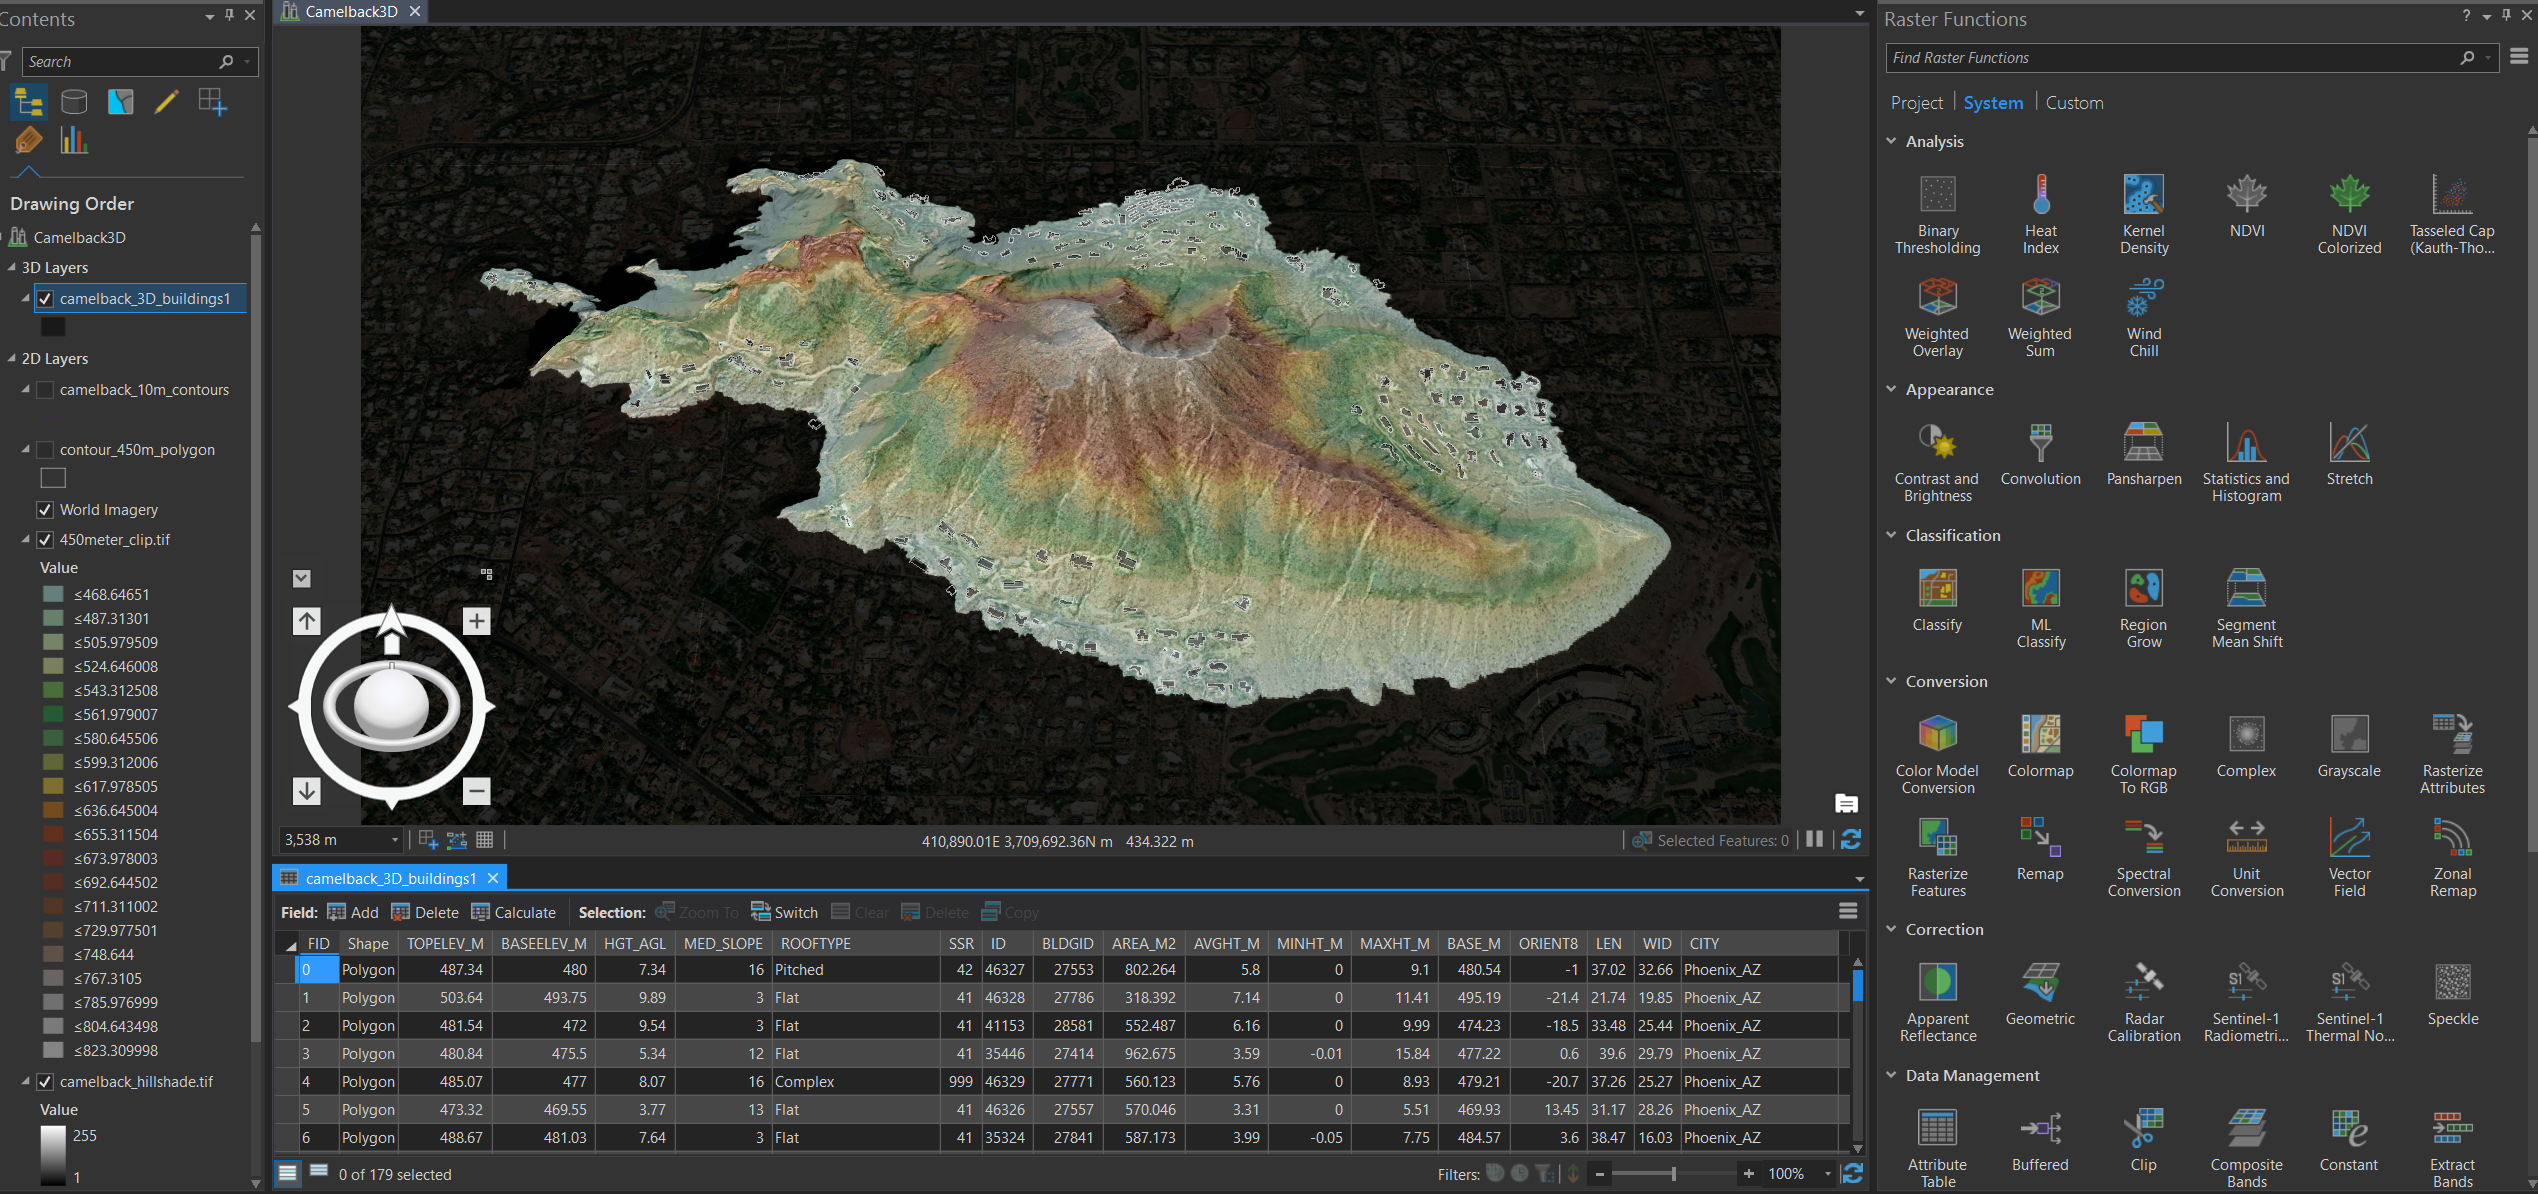 Image of ArcGIS Pro with a 3D model of Camelback Mountain. 